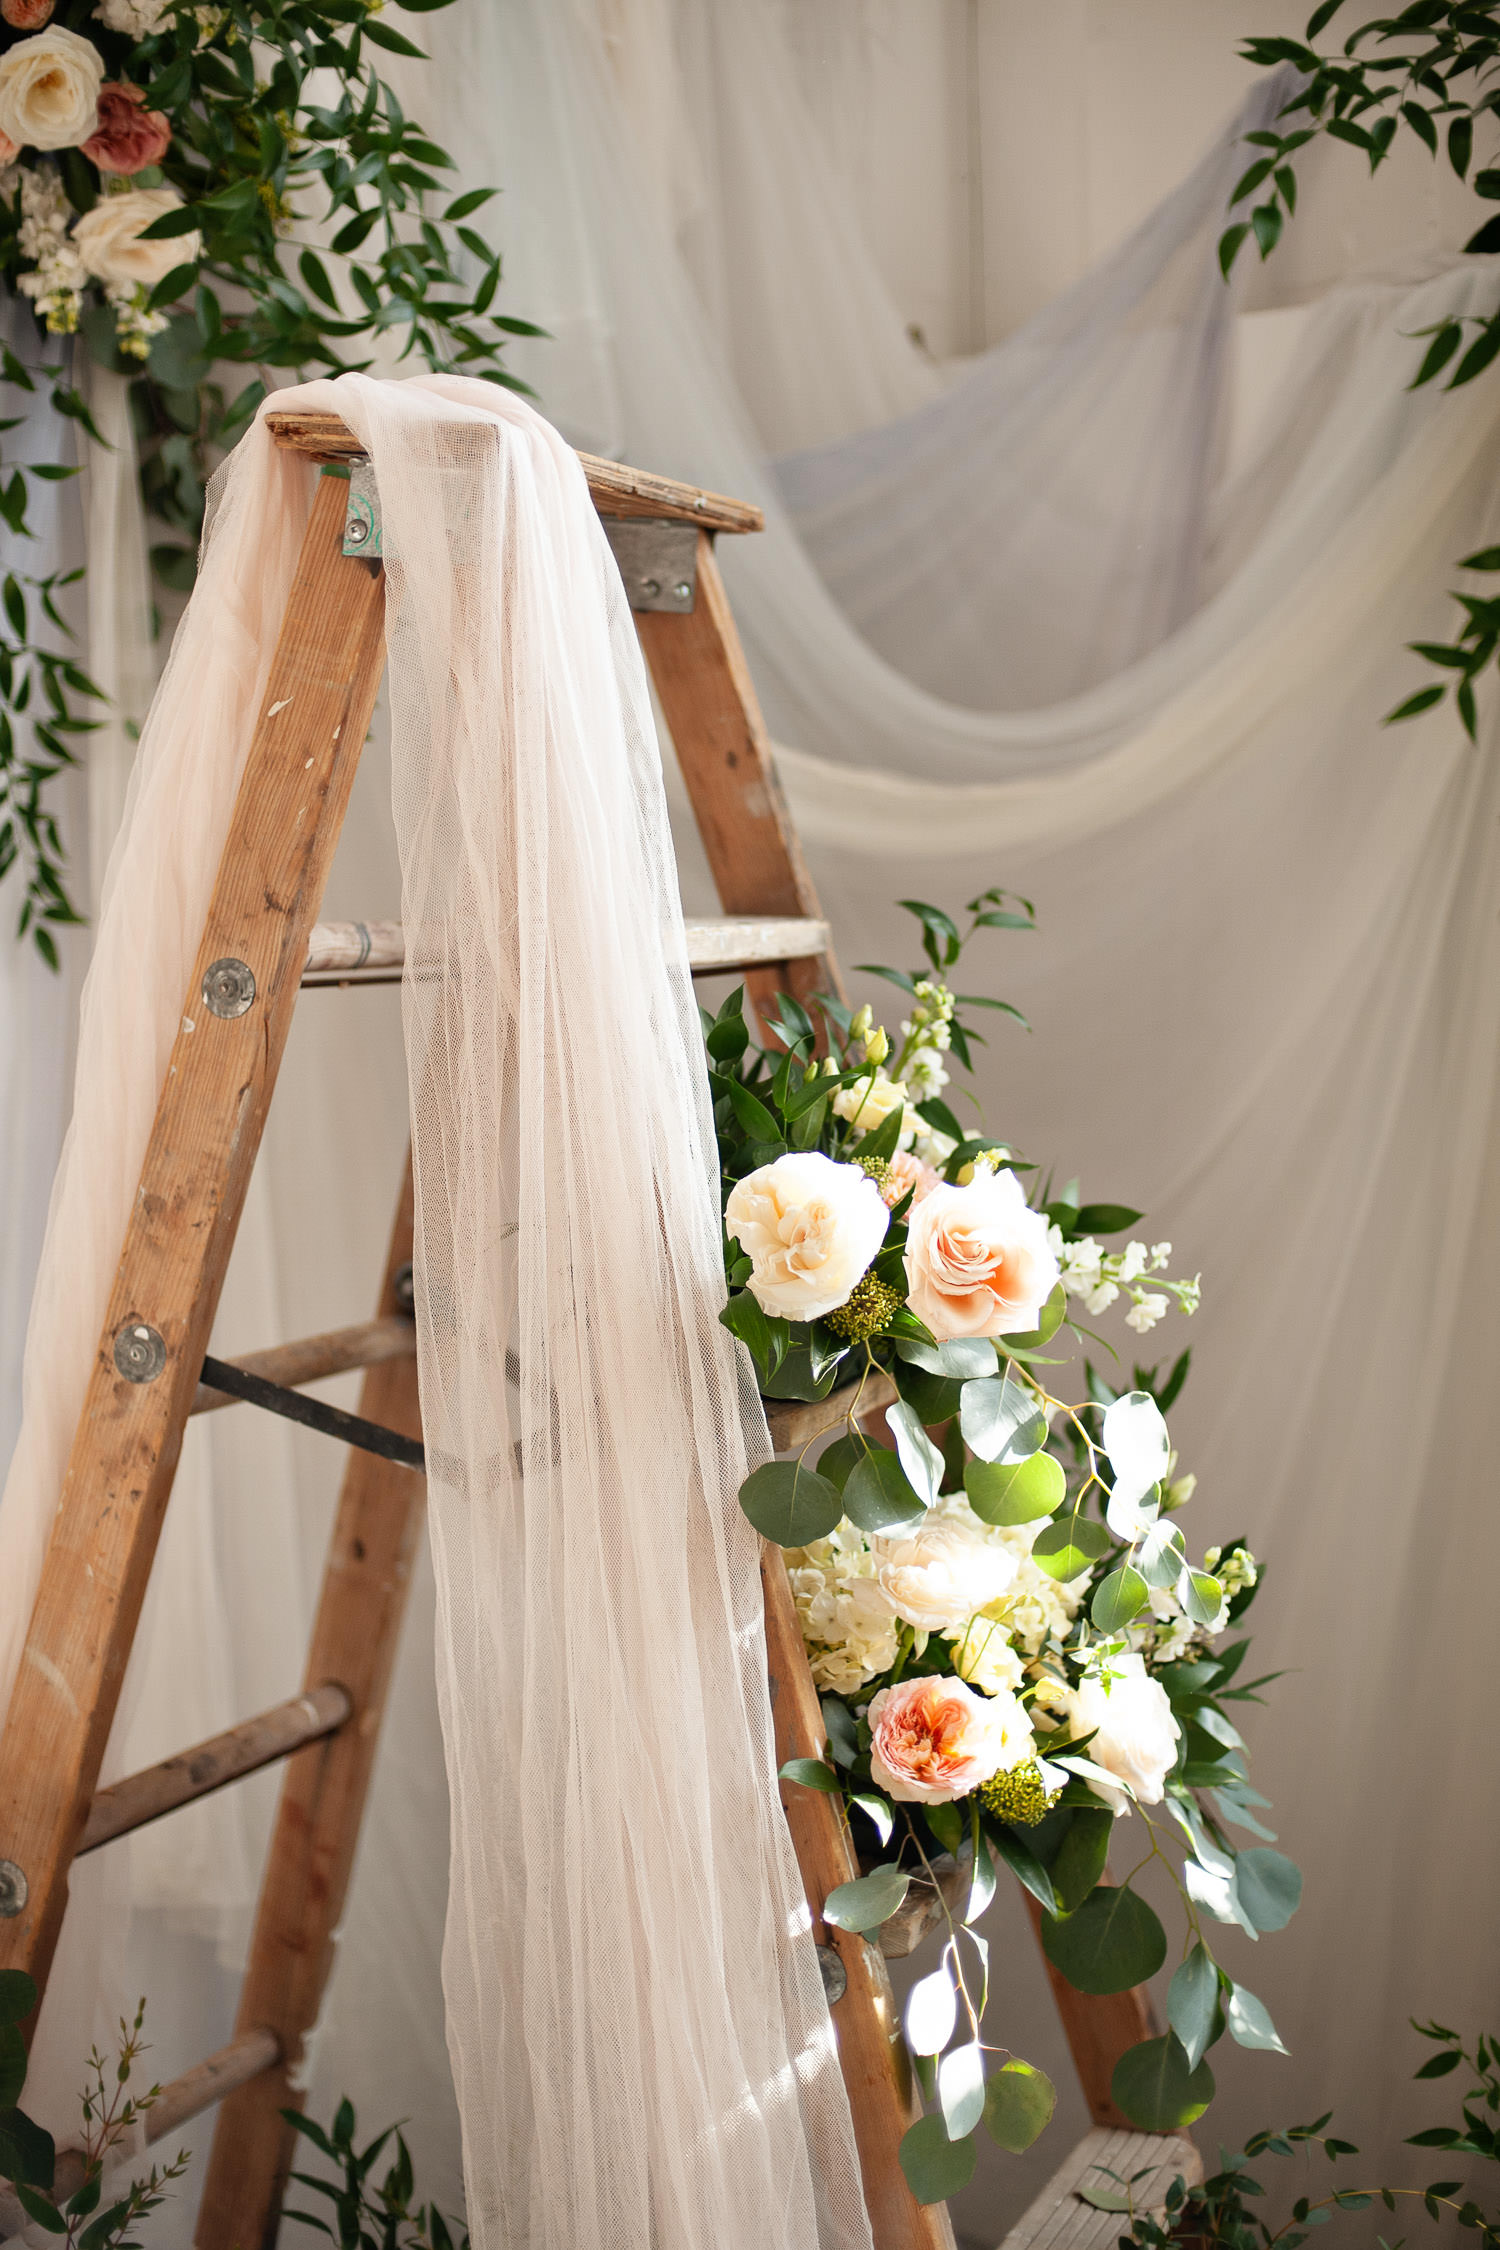 vintage ladder draped with textiles captured by Tara Whittaker Photography